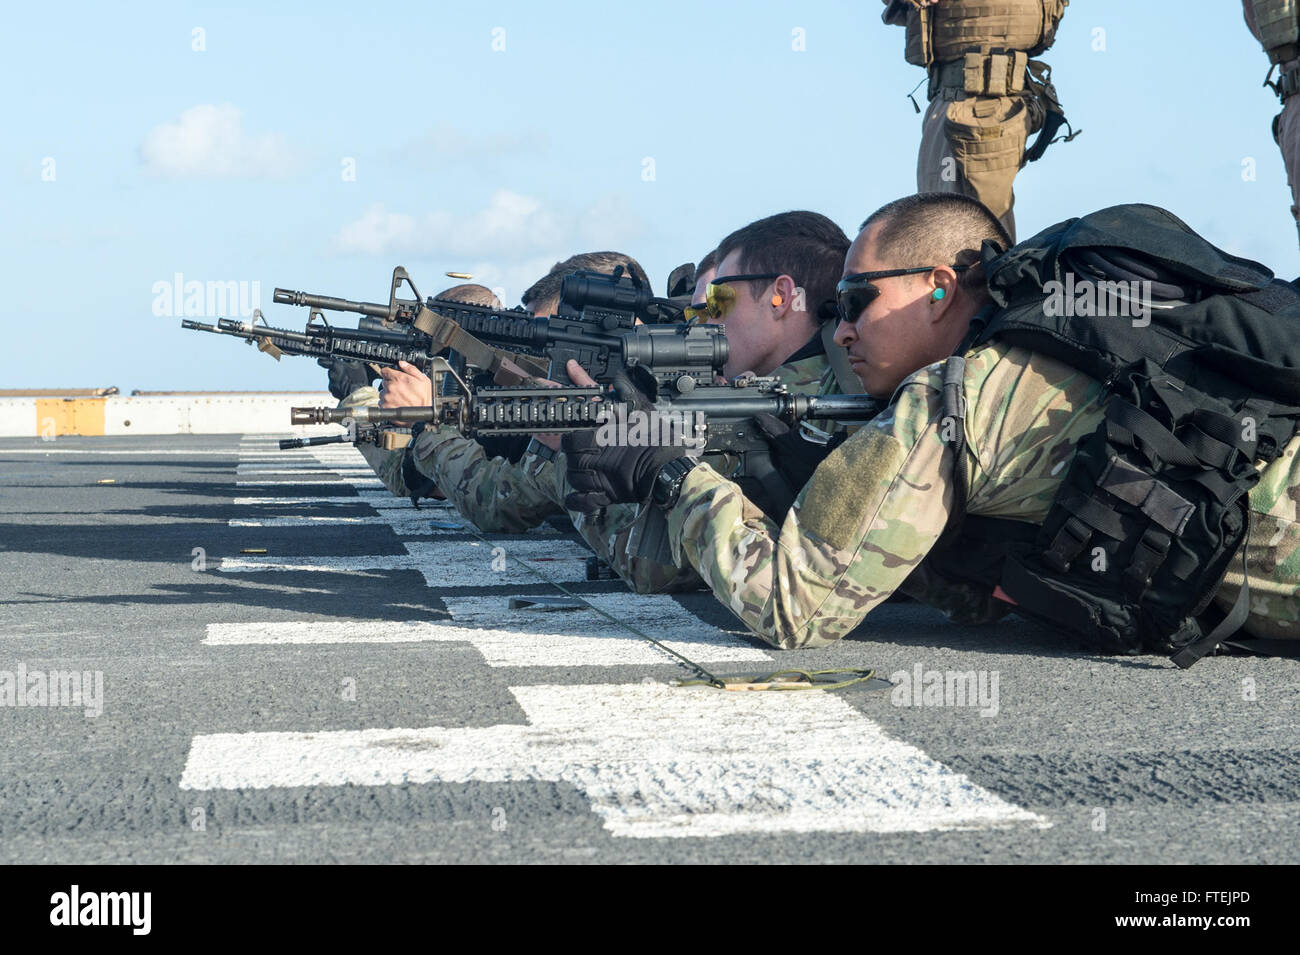 ATLANTIC OCEAN (Dec. 24, 2014) The San Antonio-class amphibious transport dock ship USS New York's (LPD 21) visit, board, search and seizure team participates in a live-fire exercise with the Marine Reconnaissance Force with the II Marine Expeditionary Force attached to the 24th Marine Expeditionary Unit (MEU) on the flight deck, Dec. 24, 2014. New York, part of the Iwo Jima Amphibious Ready Group/24th Marine Expeditionary Unit, is conducting naval operations in the U.S. 6th Fleet area of operations in support of U.S. national security interests in Europe Stock Photo